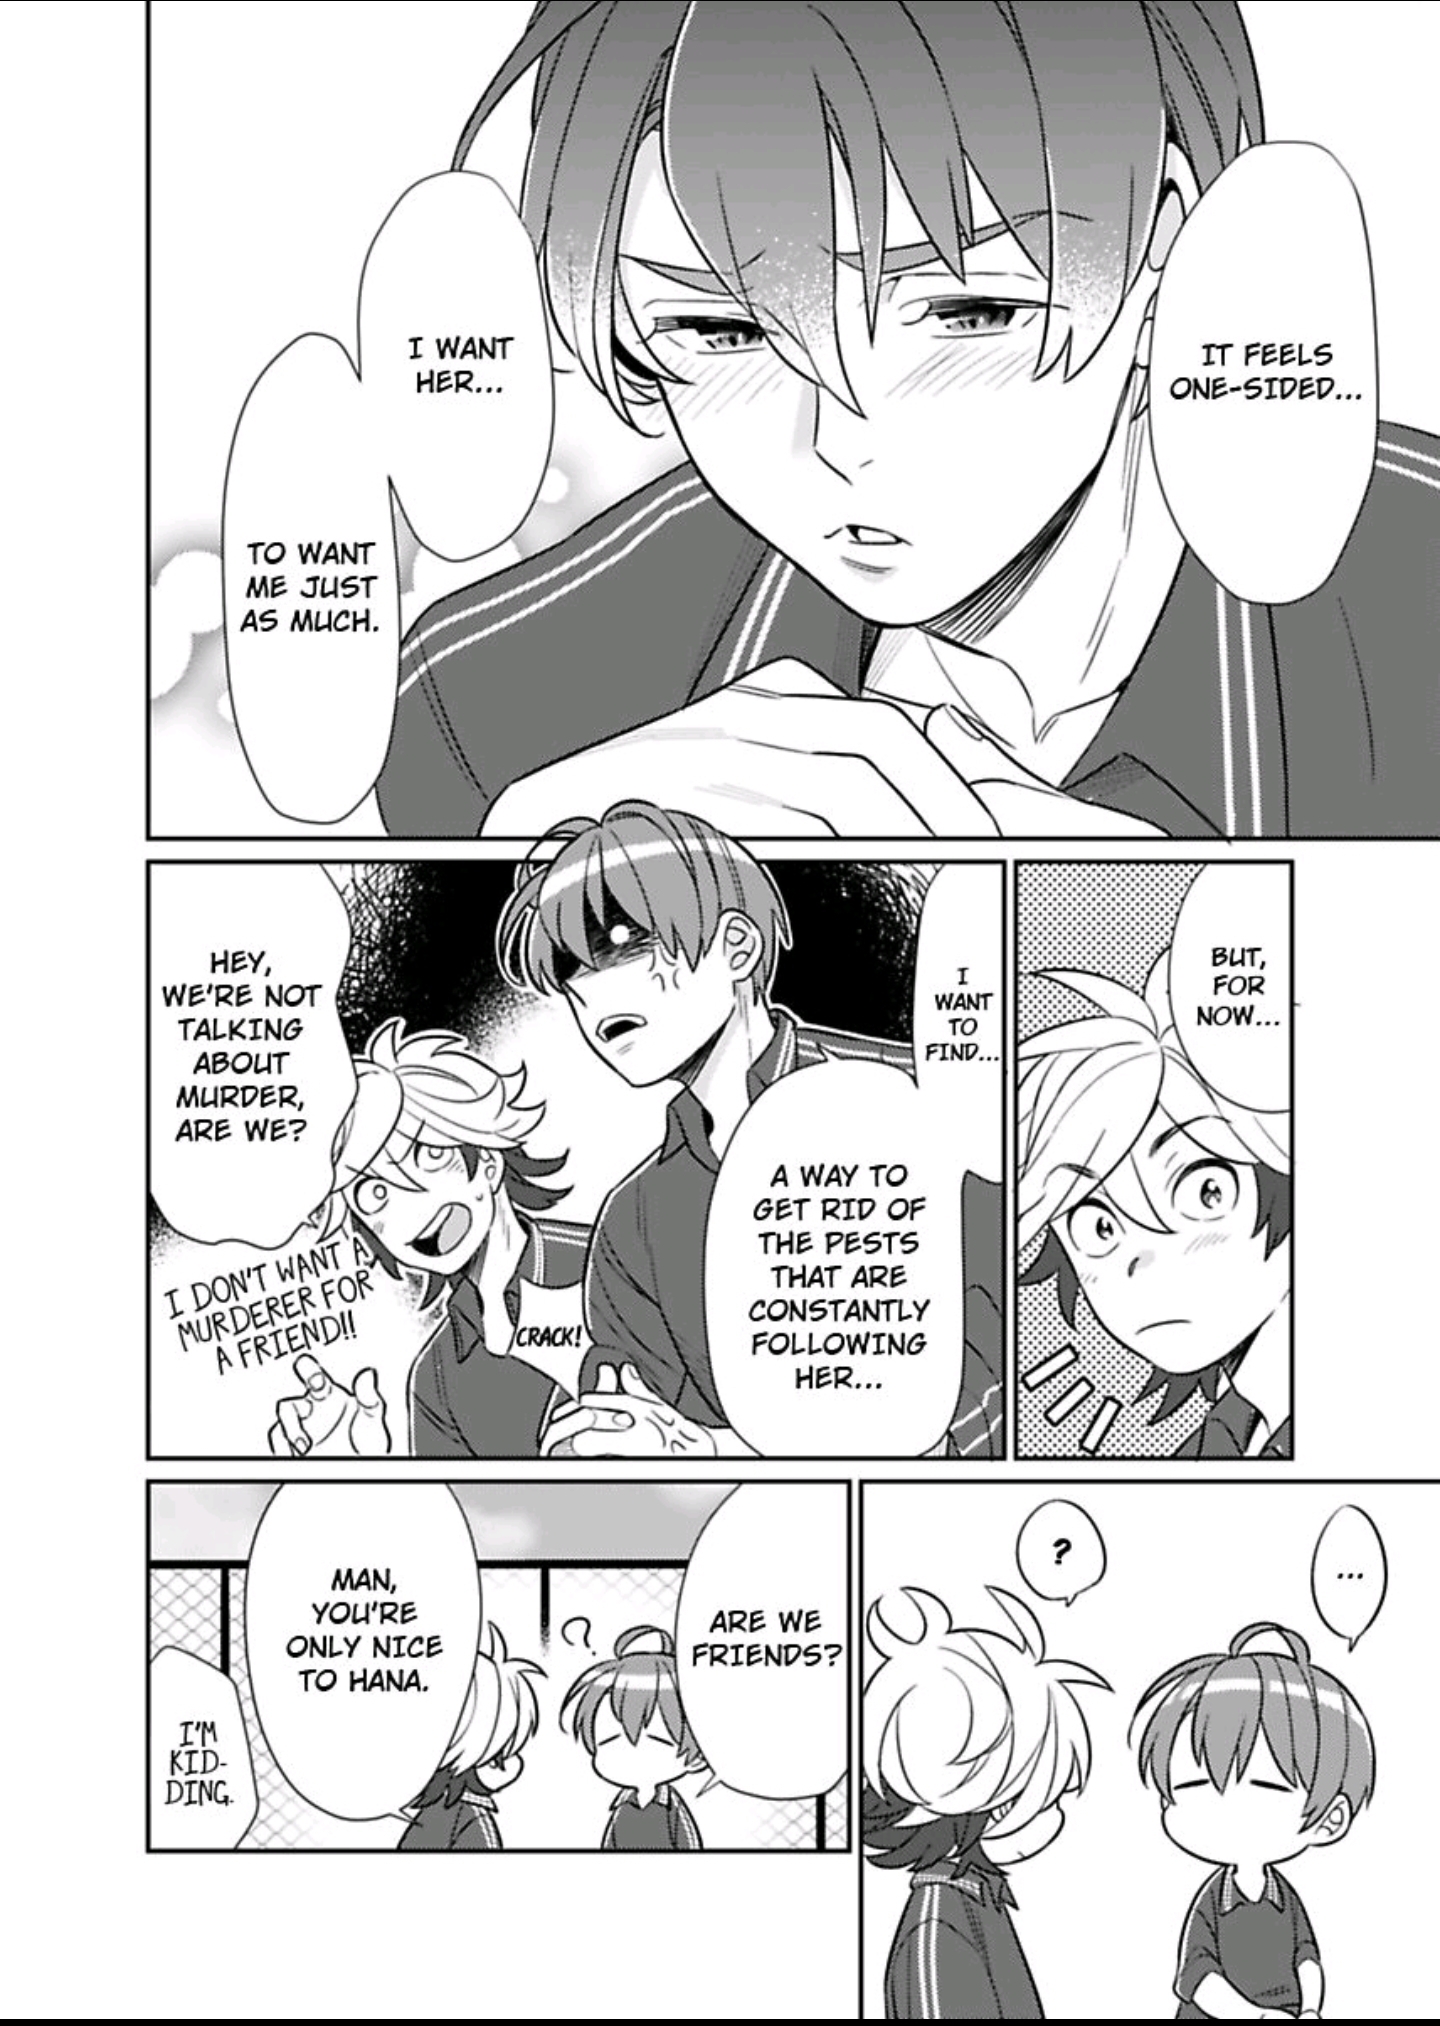 That Unexpected Side to my Childhood Friend -Watch Out for the Animal in Him! Vol.1 Ch.5